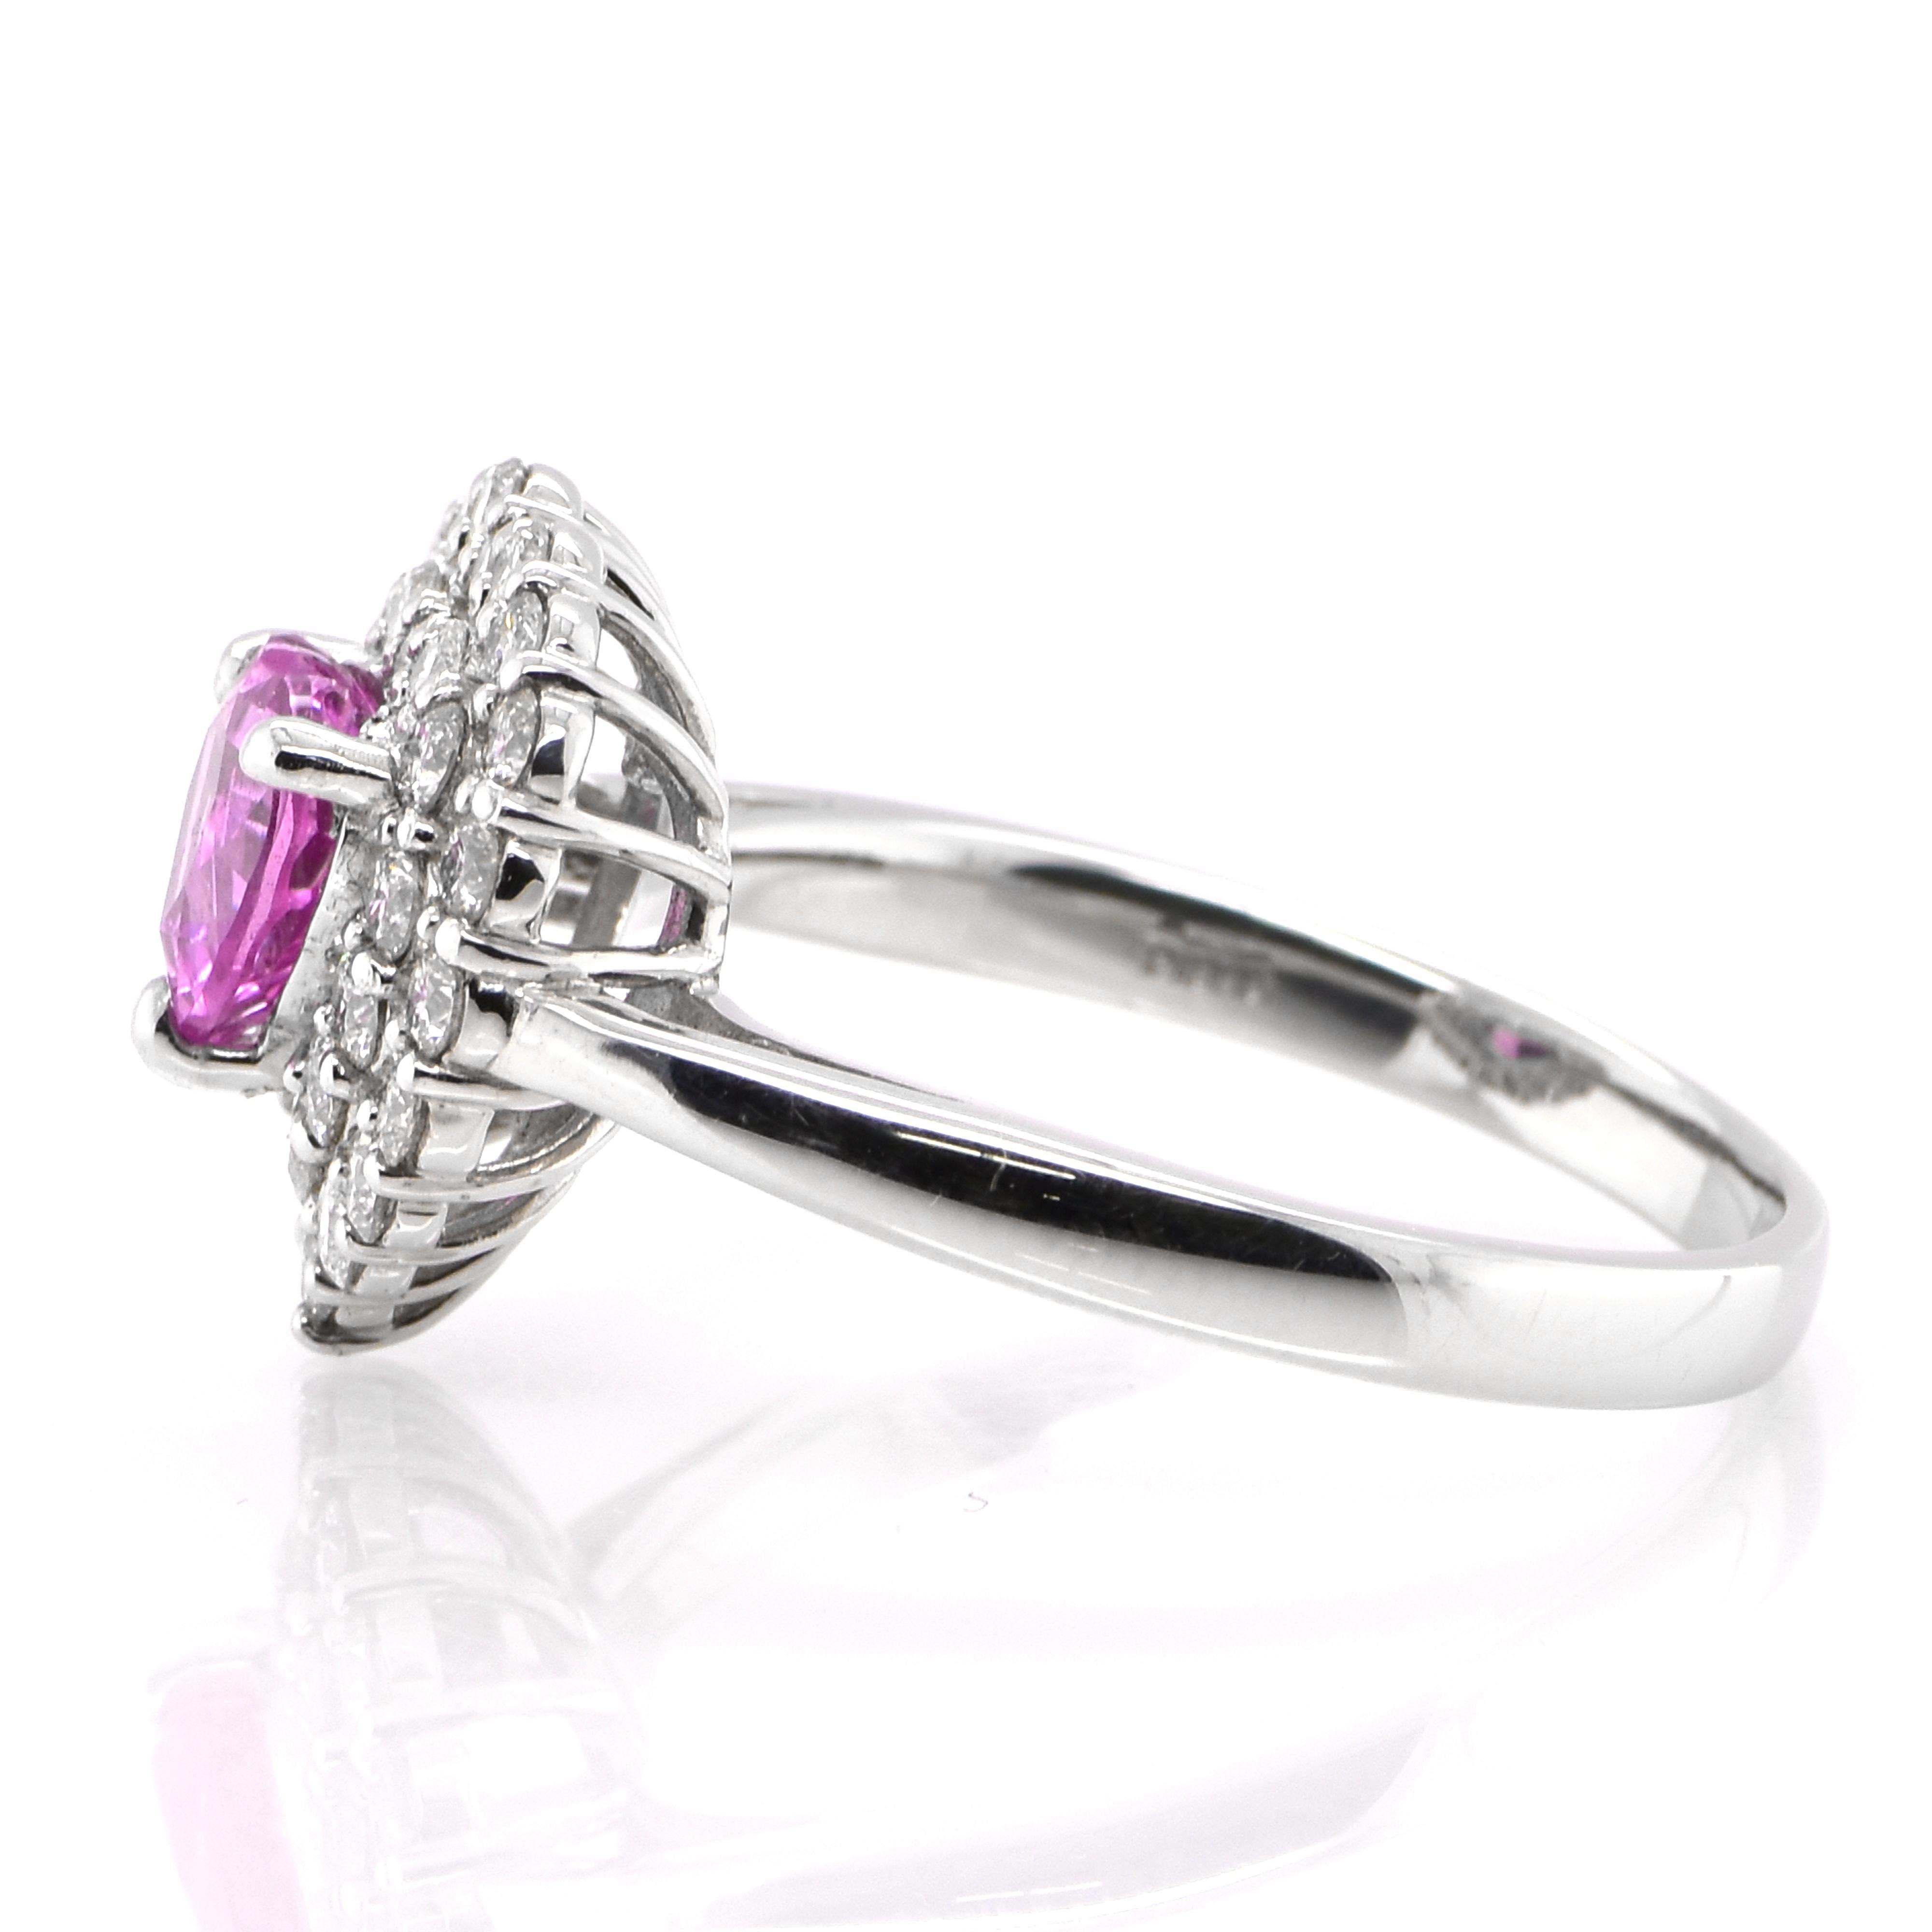 Heart Cut 1.06 Carat Heart-Cut Pink Sapphire and Diamond Double-Halo Ring Set in Platinum For Sale